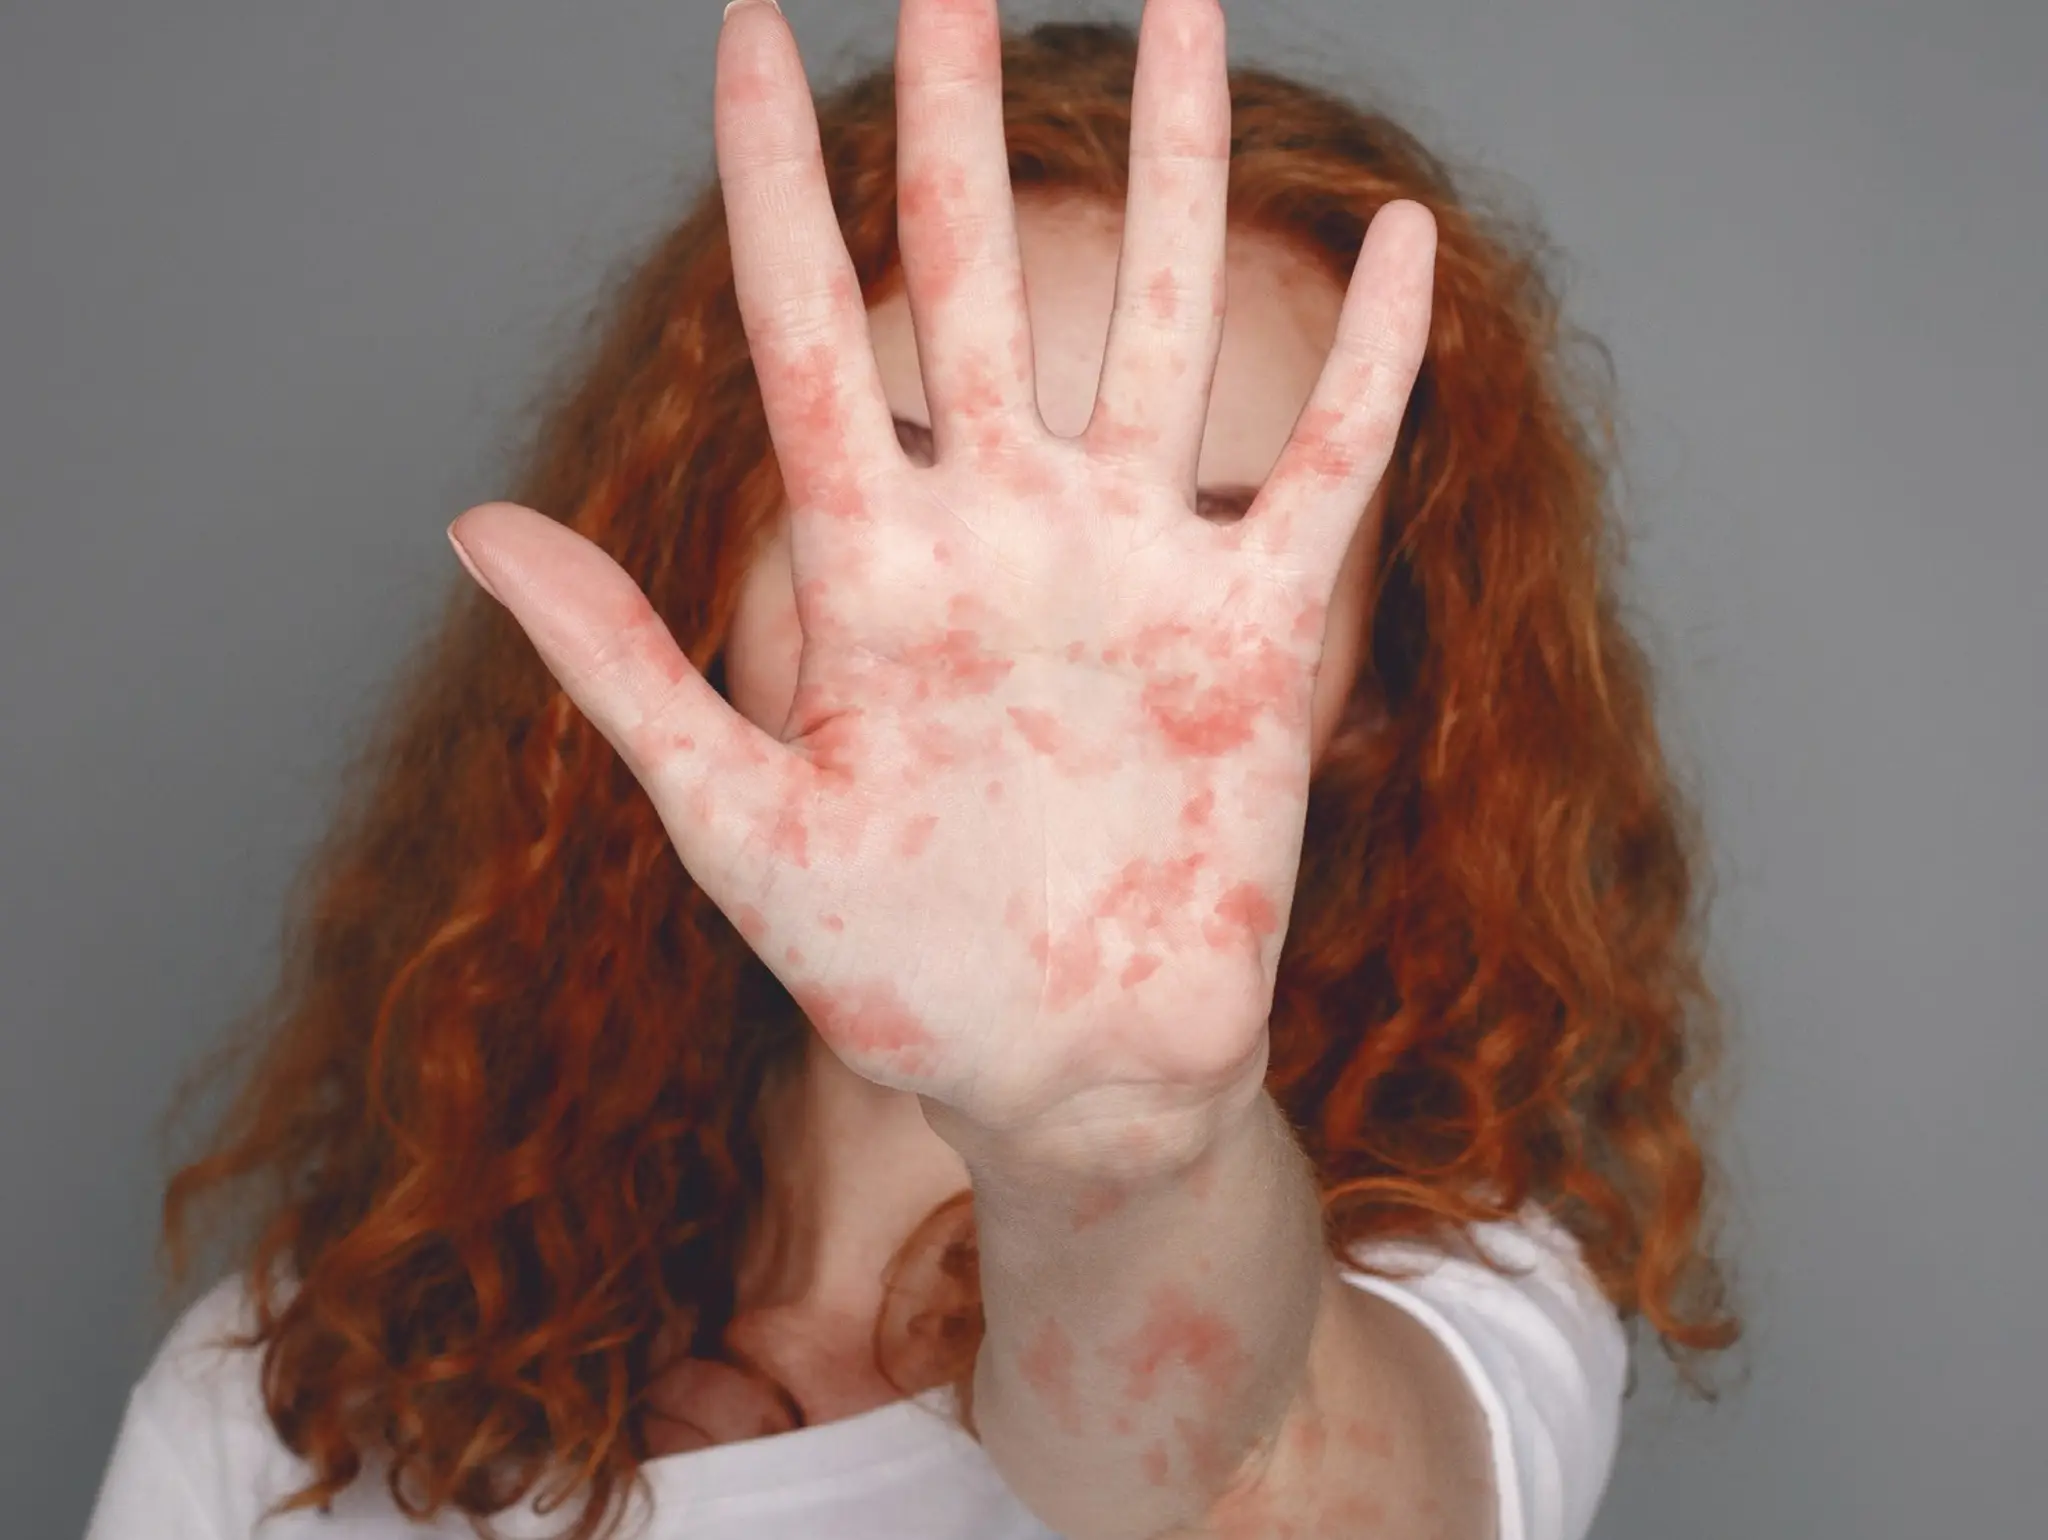 Five facts about measles